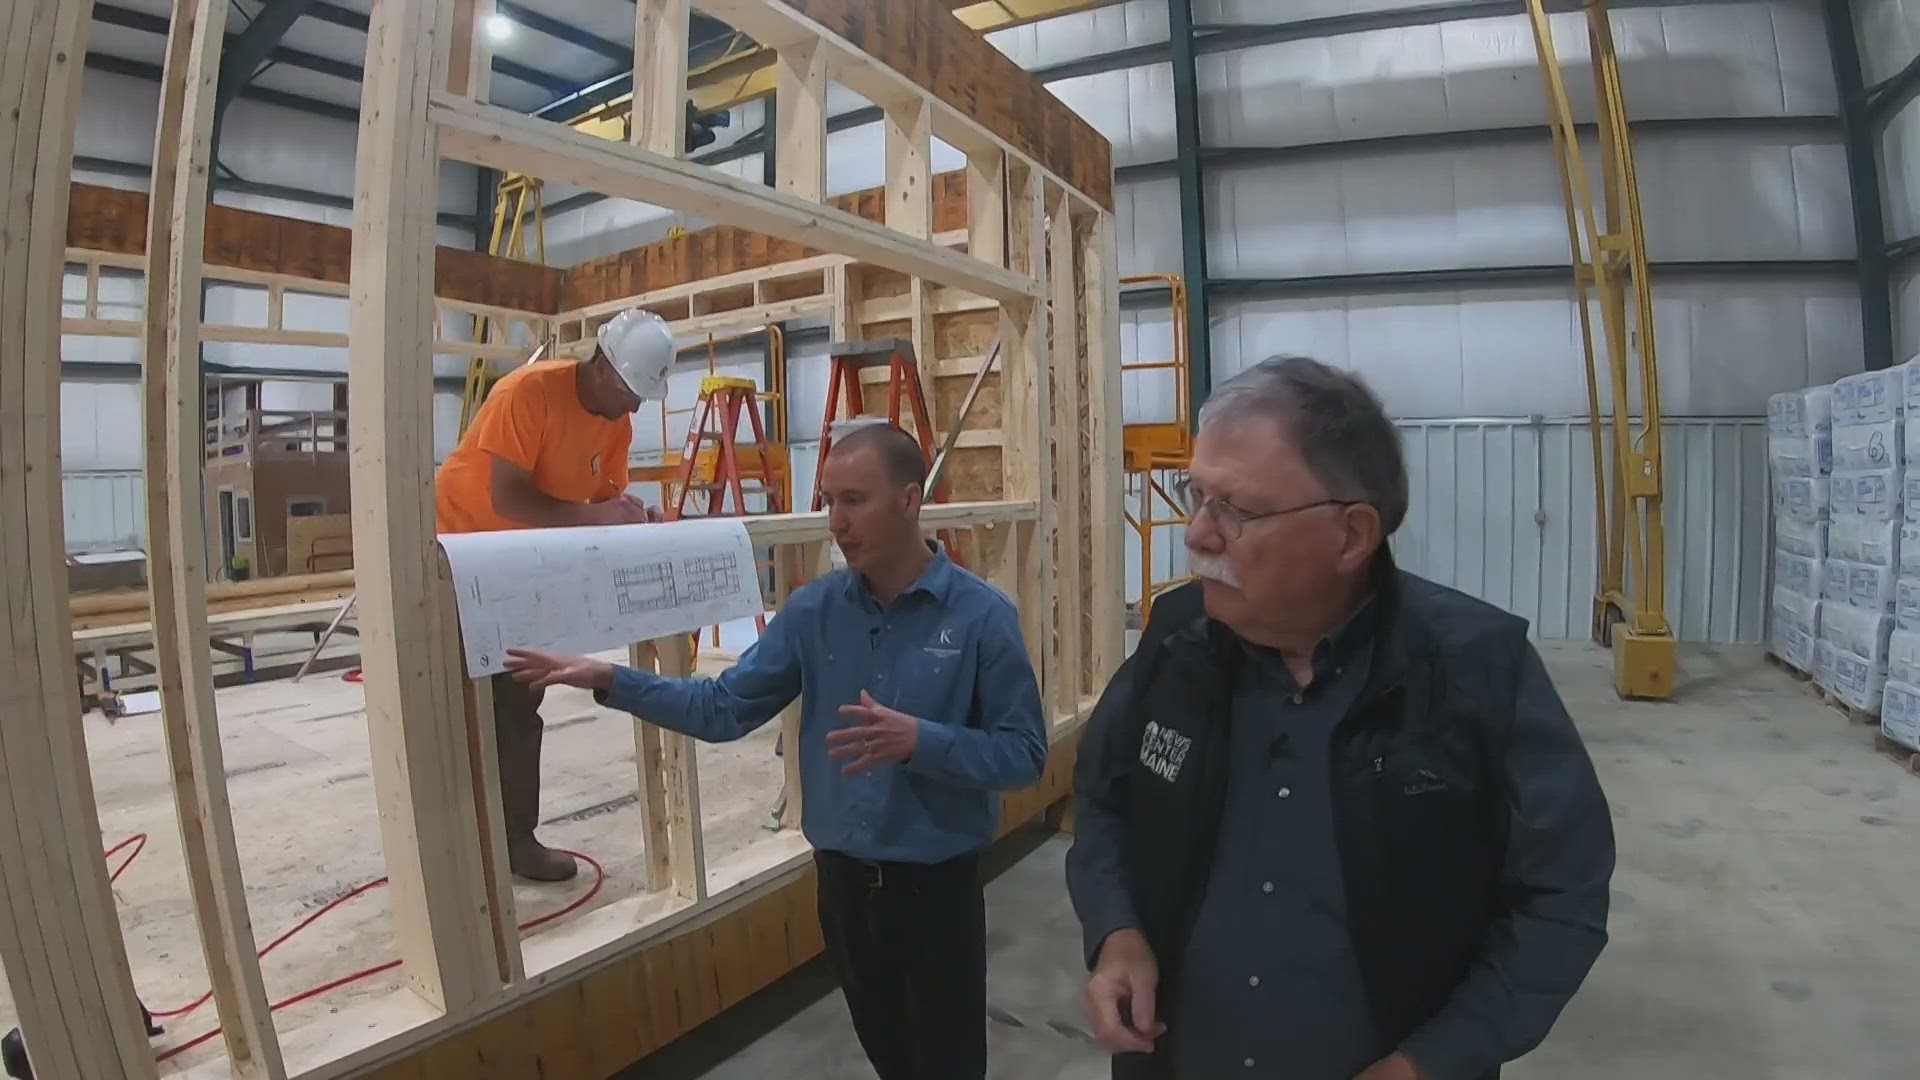 Knickerbocker Group is building small, modular homes, called prefab pods, as a way to help meet the housing crisis in Maine.